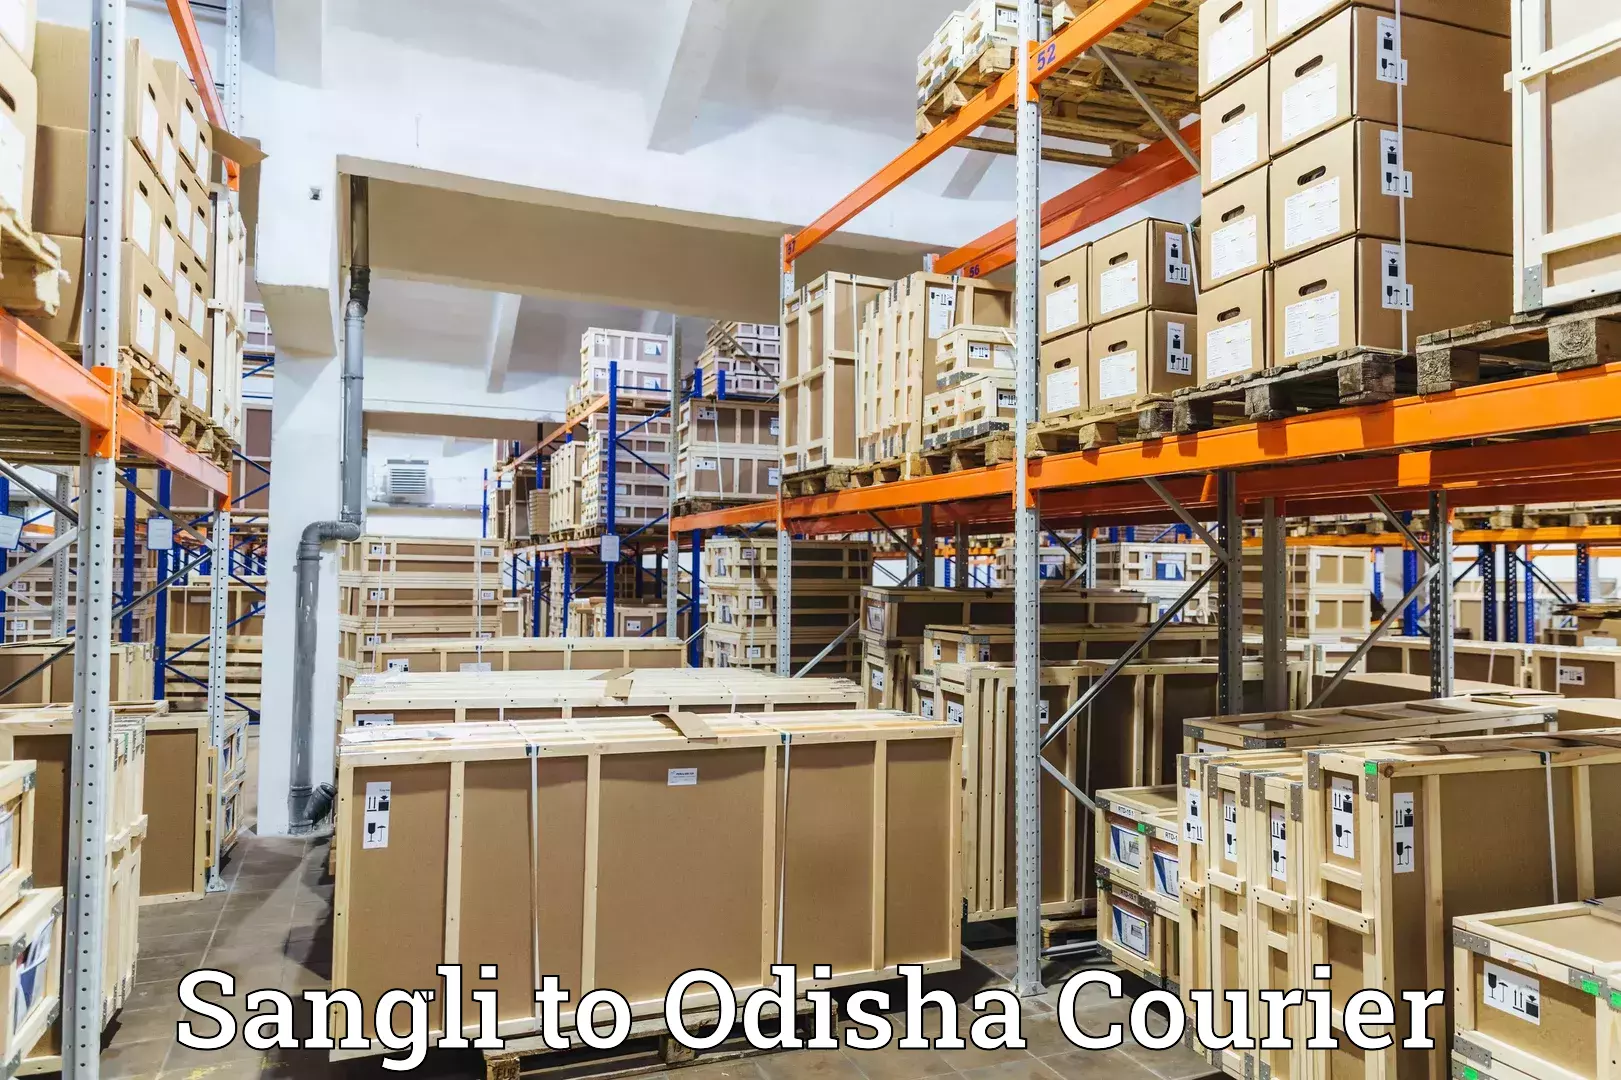 Courier dispatch services in Sangli to Paradip Port